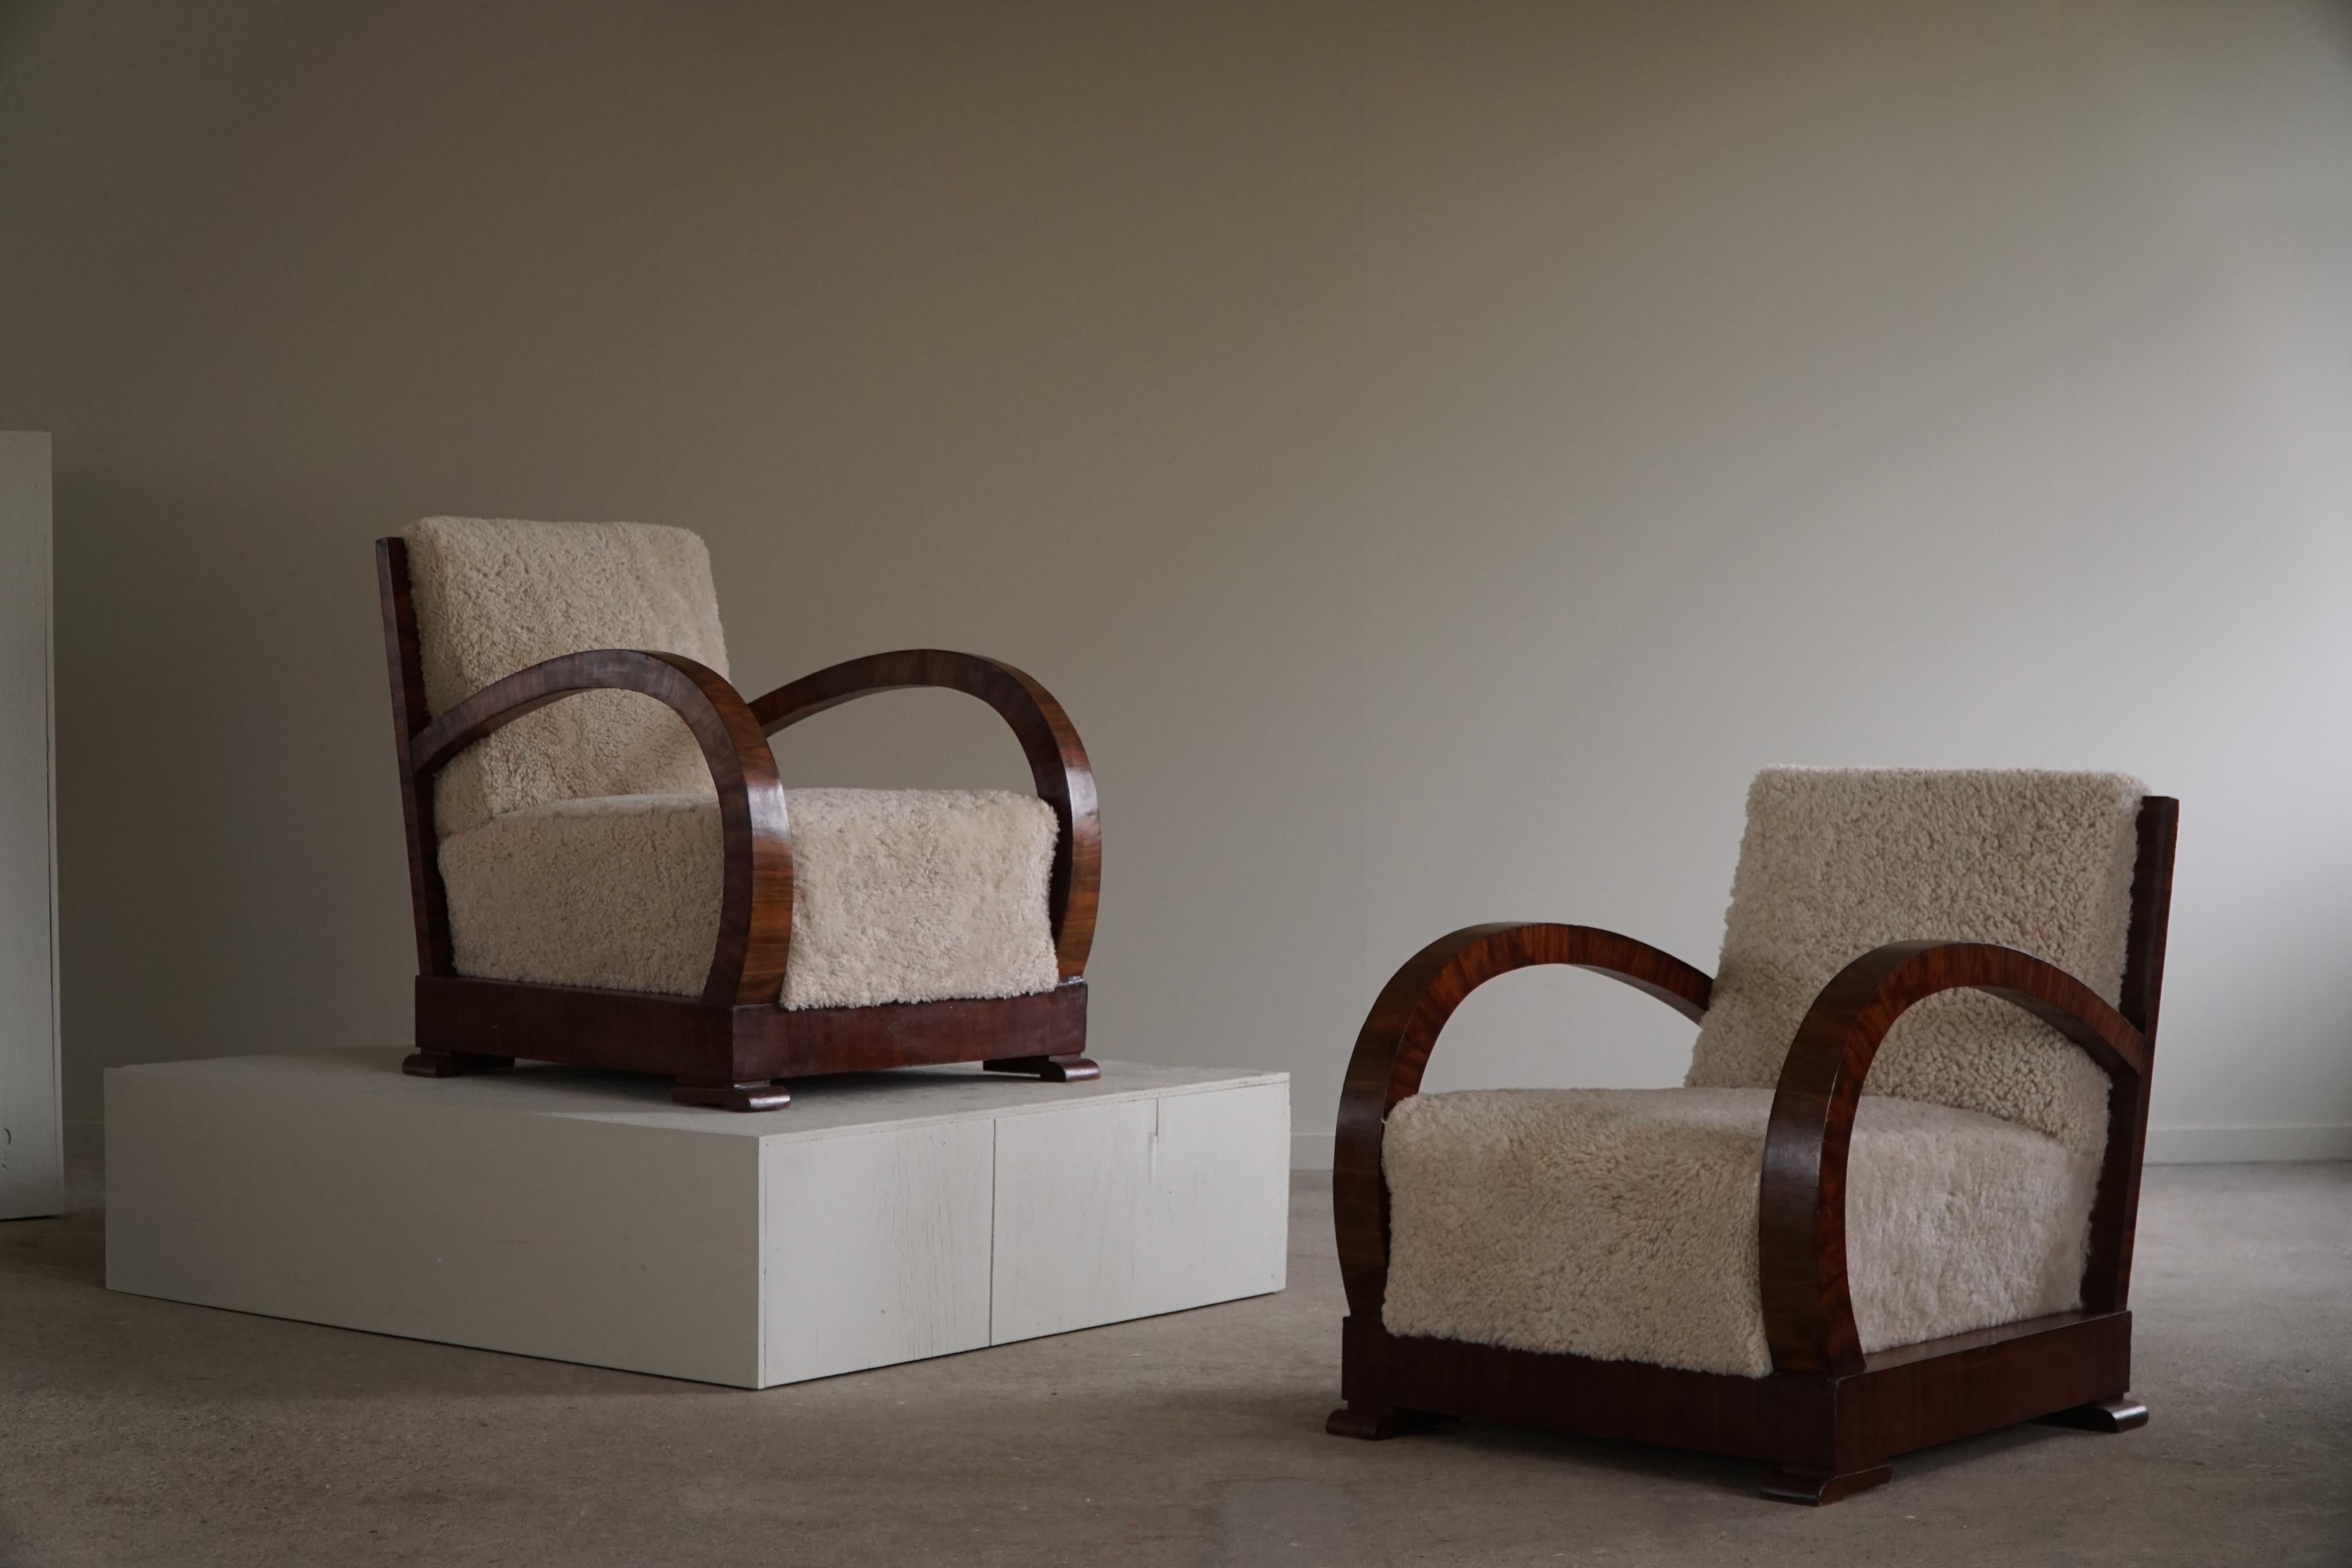 Pair of Danish Lounge Chairs, Reupholstered, Lambswool & Walnut, Art Deco, 1930s For Sale 11